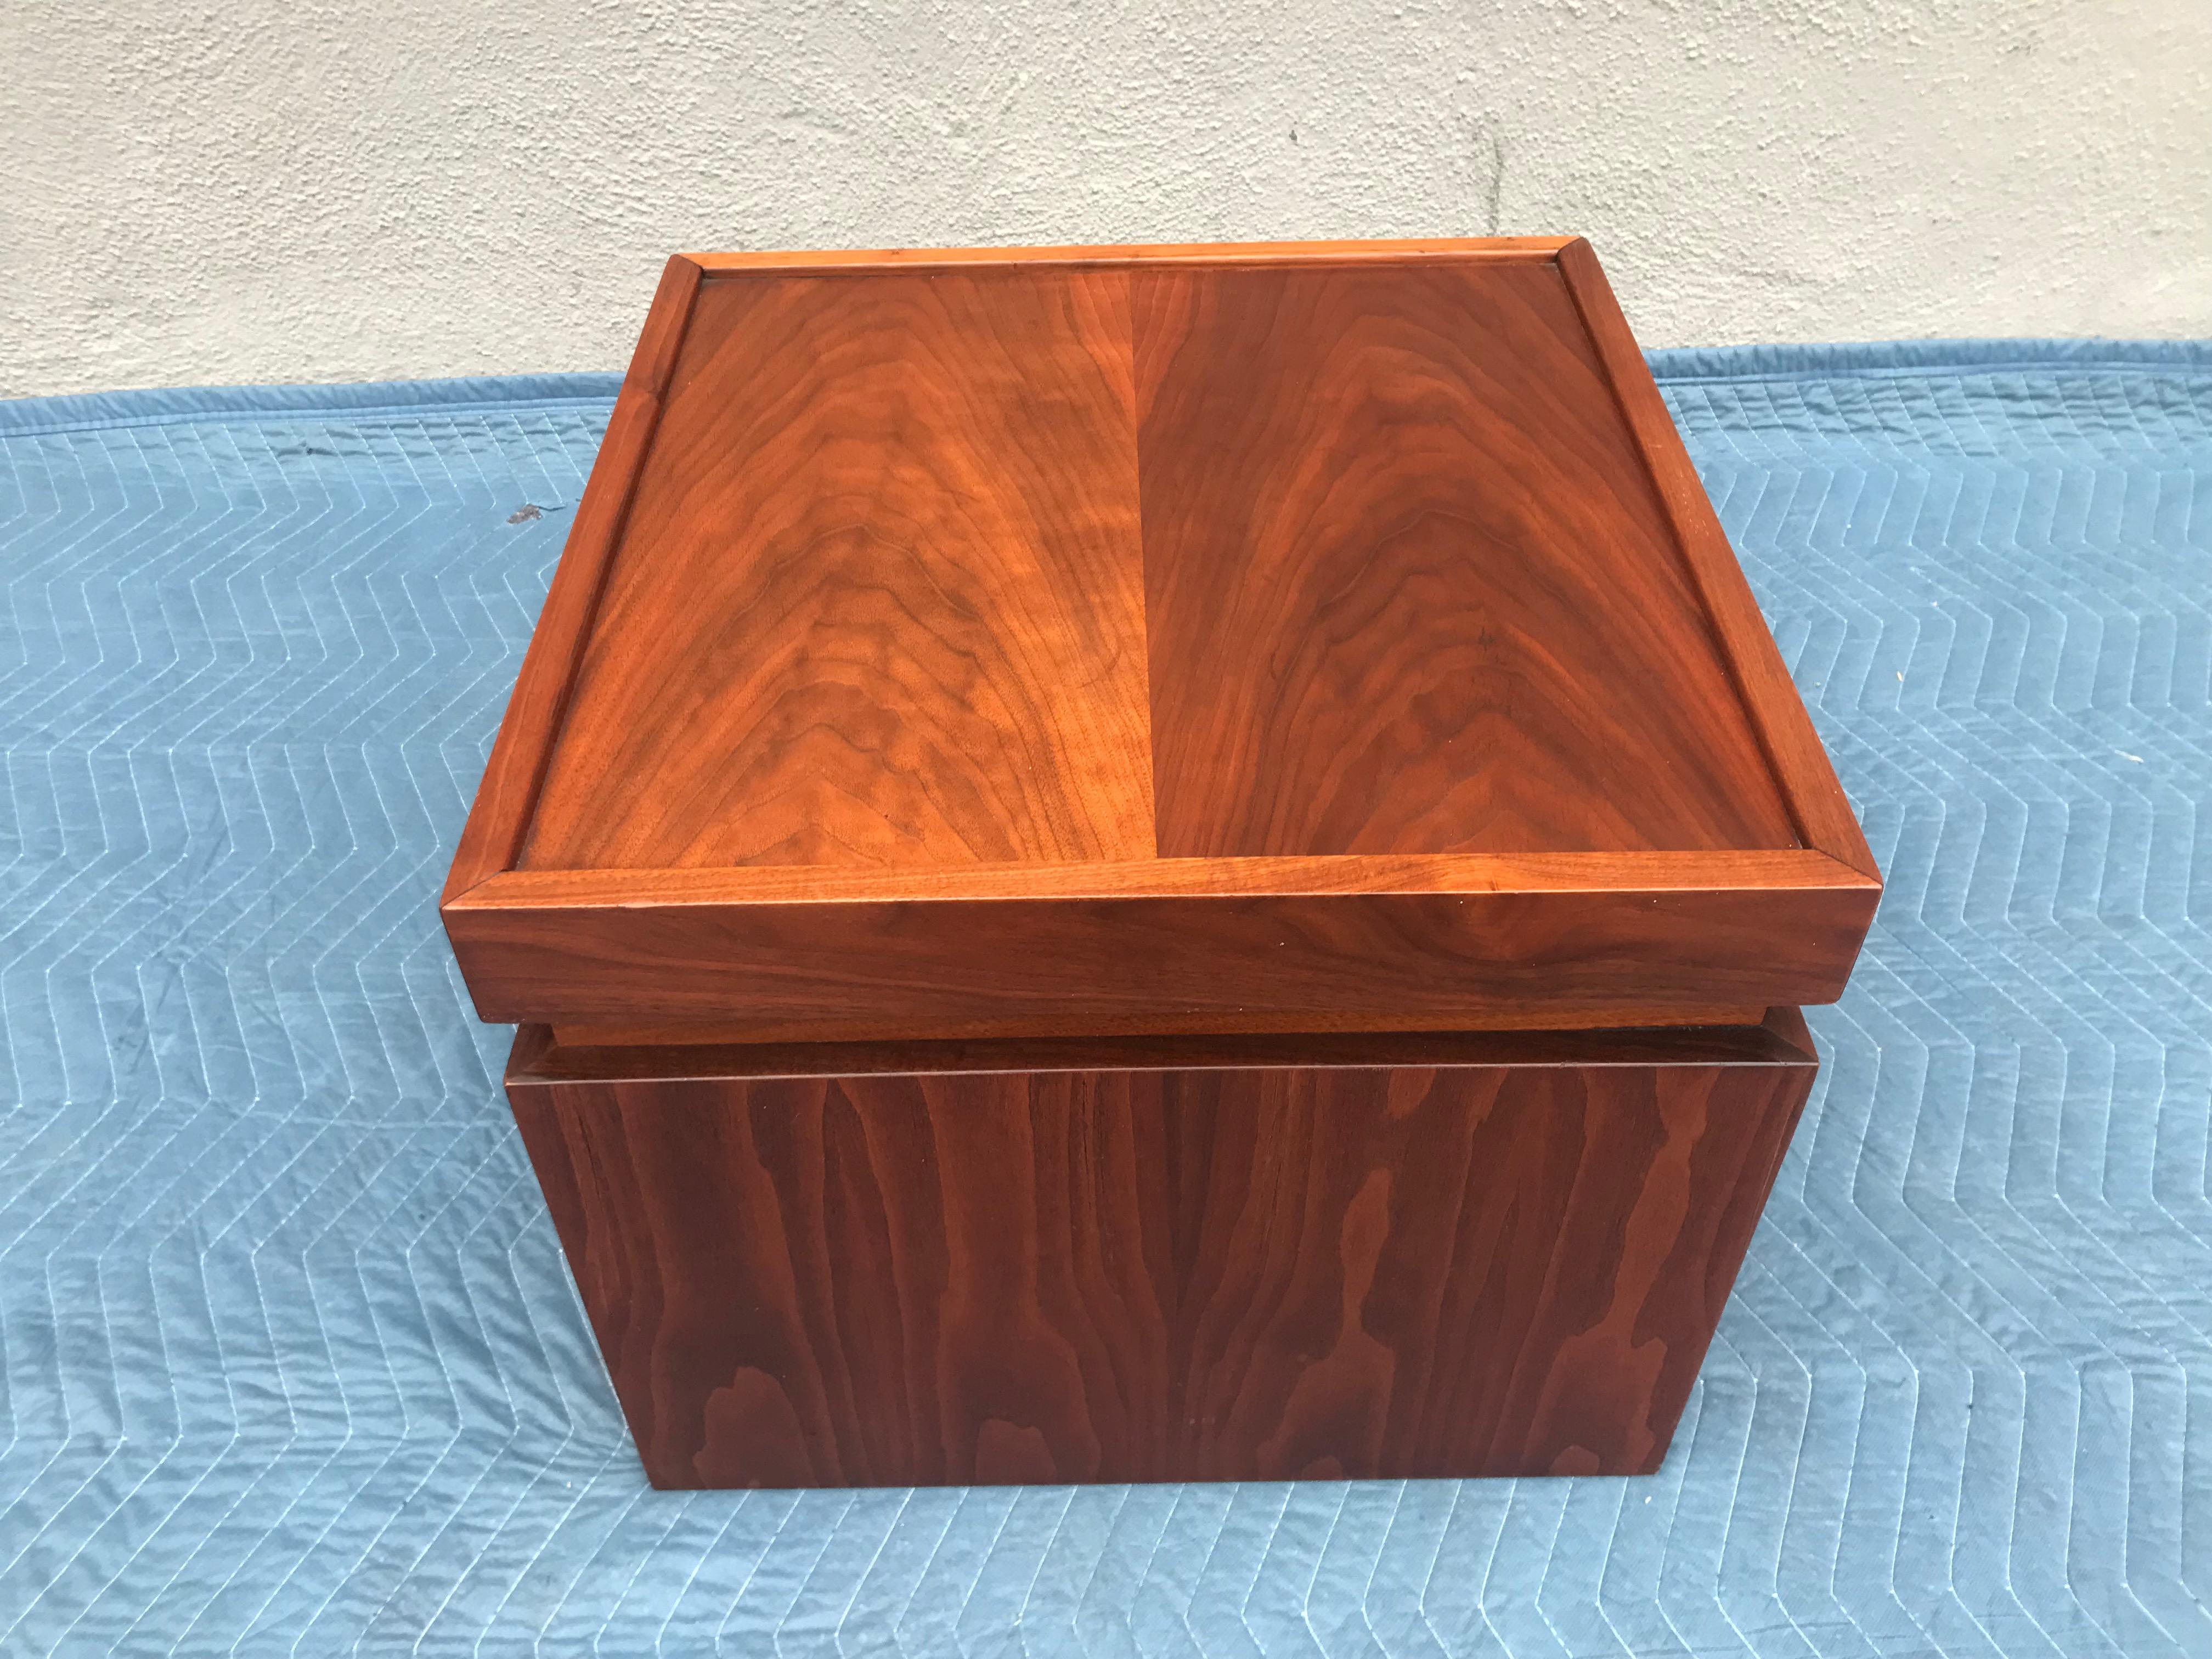 Handsome California design occasional table.
Multi functional. 
Manufactured by Brown & Saltman.
Beautiful walnut grain with reversible top, inlaid wood chess design and storage.
Original vintage condition with a nice patina and a small chip